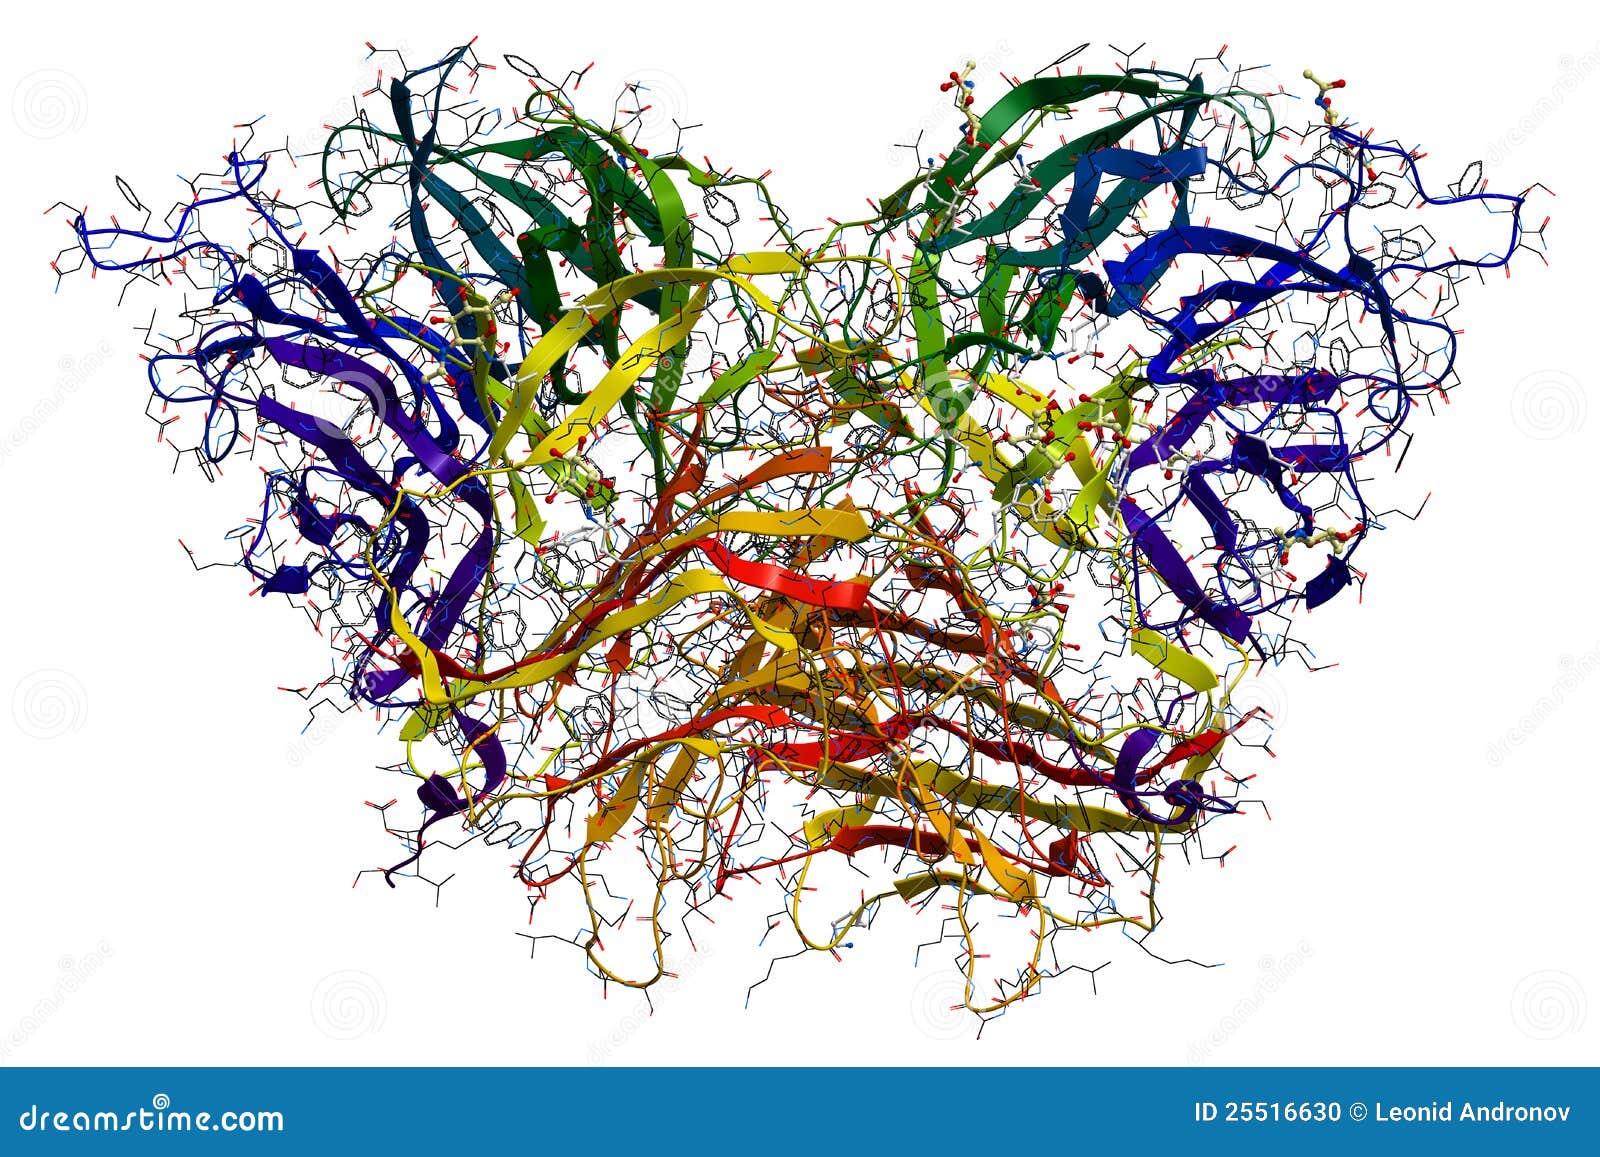 enzyme invertase 3d view